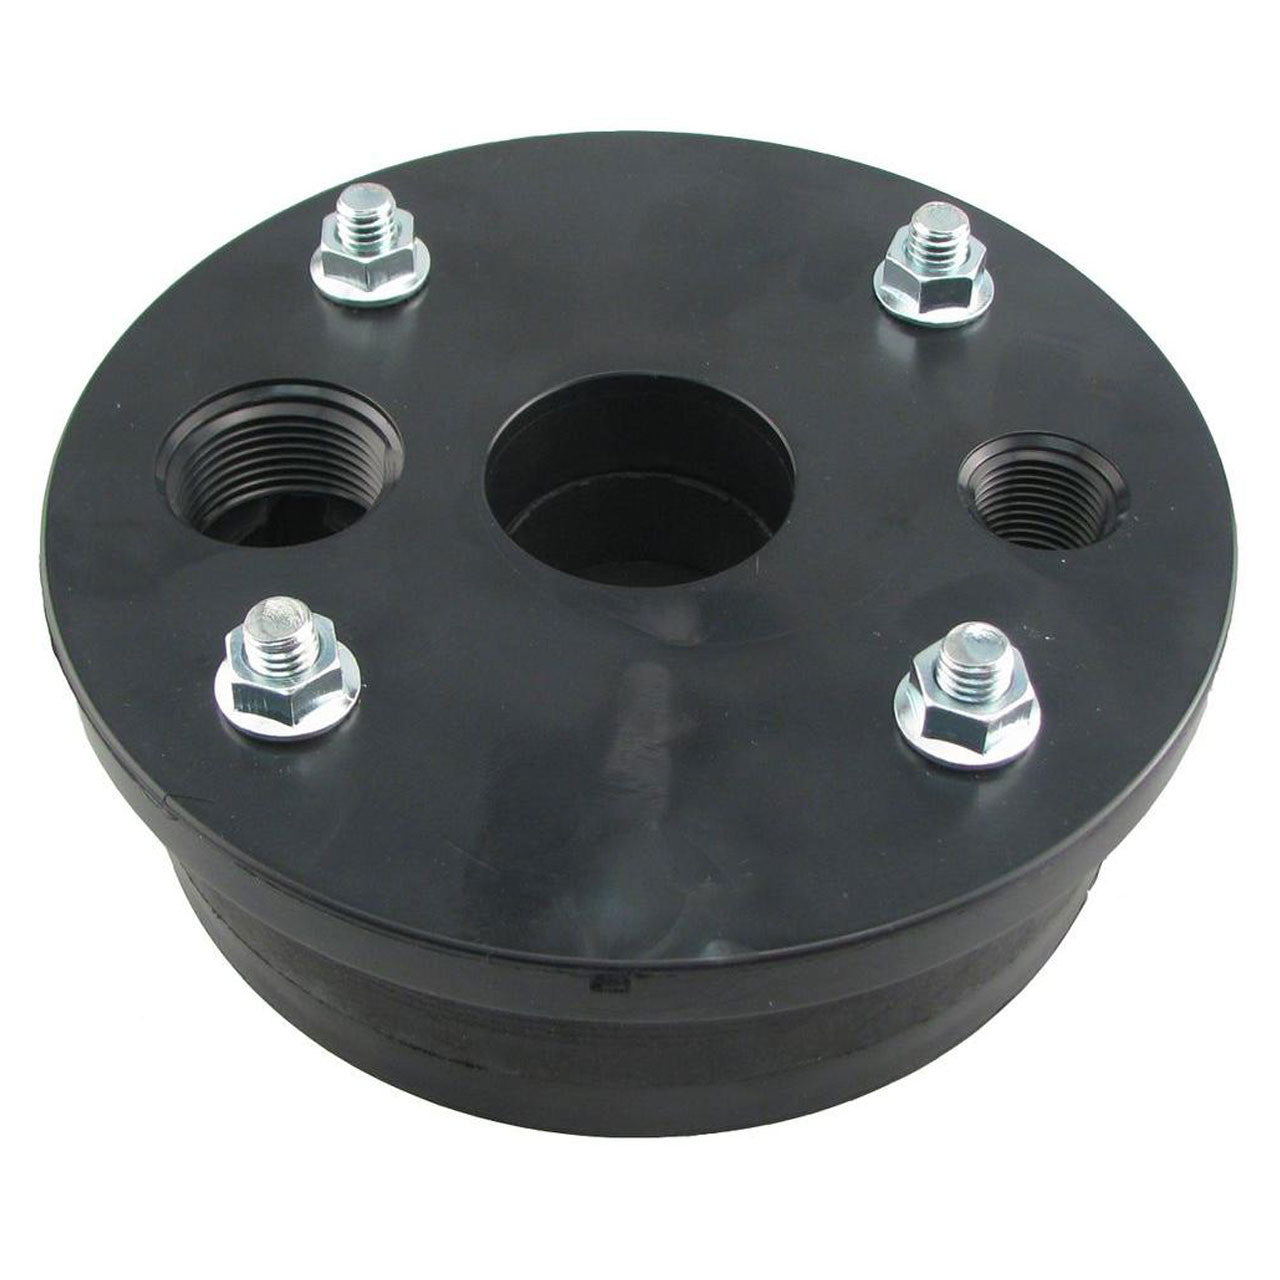 Plastic Housing Submersible Pump Well Seal